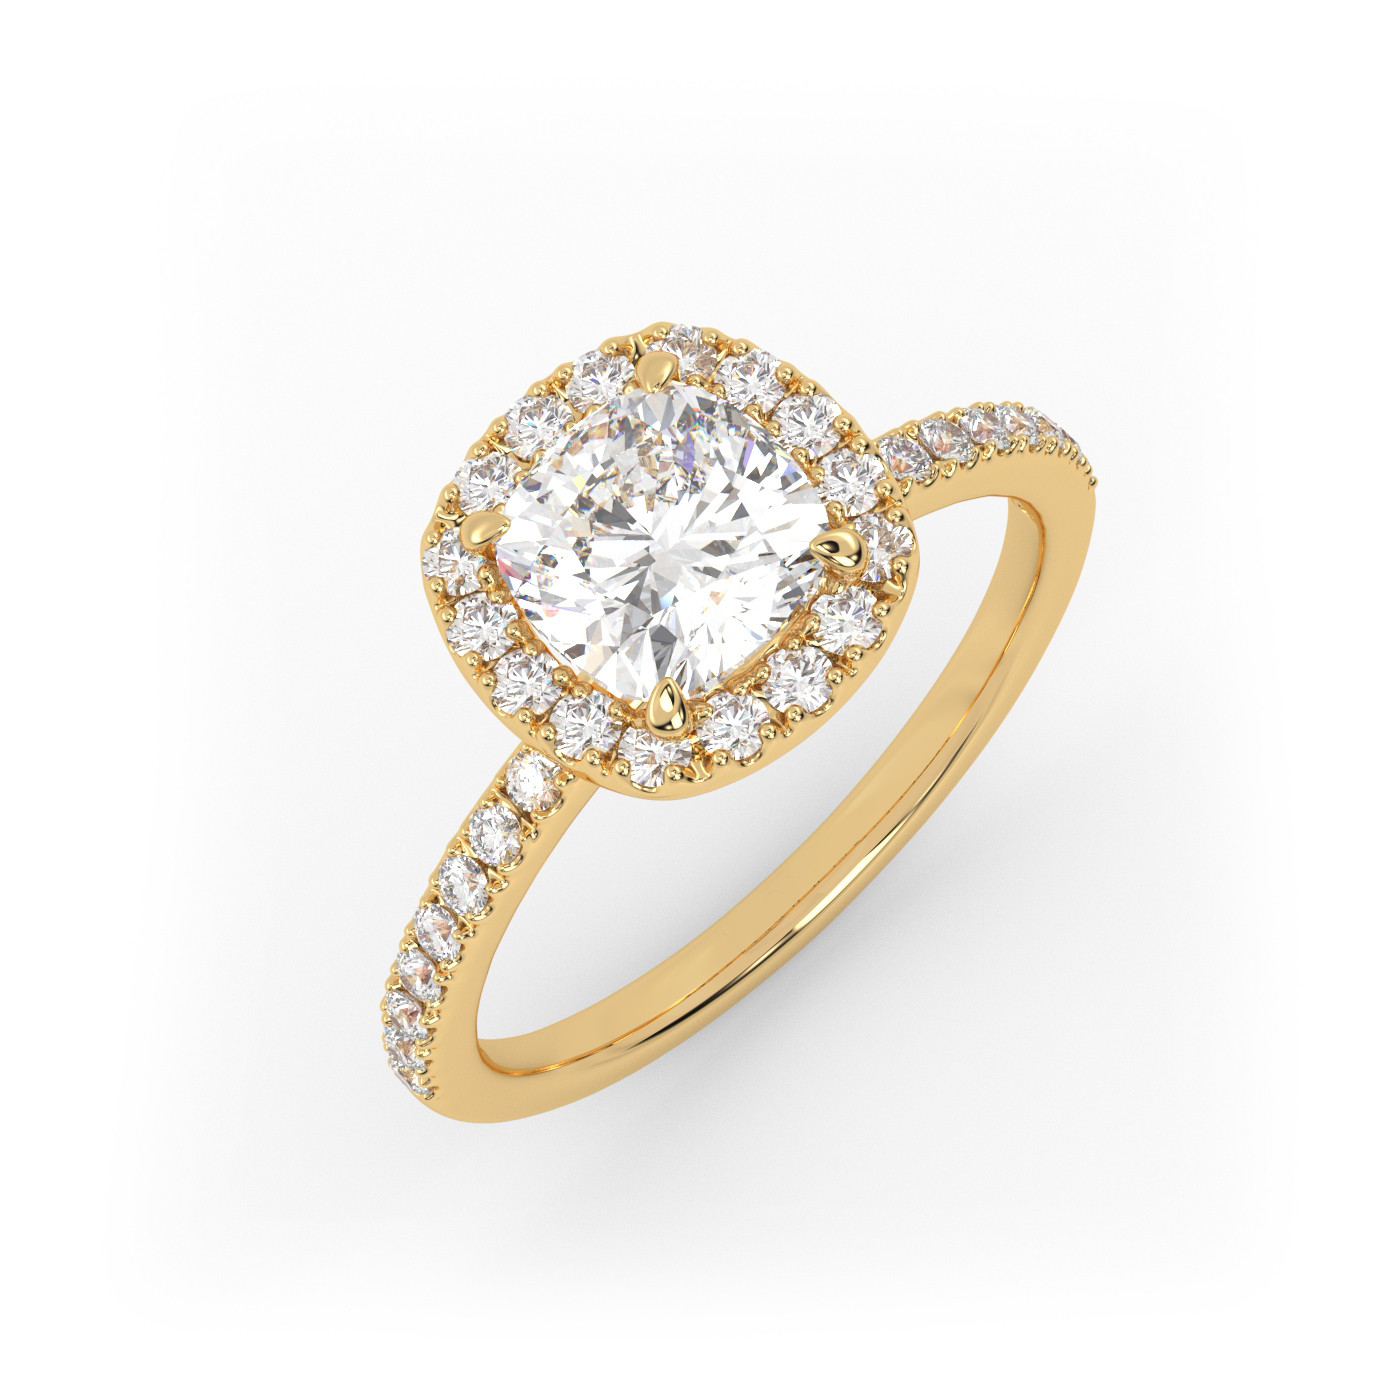 18K YELLOW GOLD Cushion Diamond Engagement Ring With Pave and Halo Style